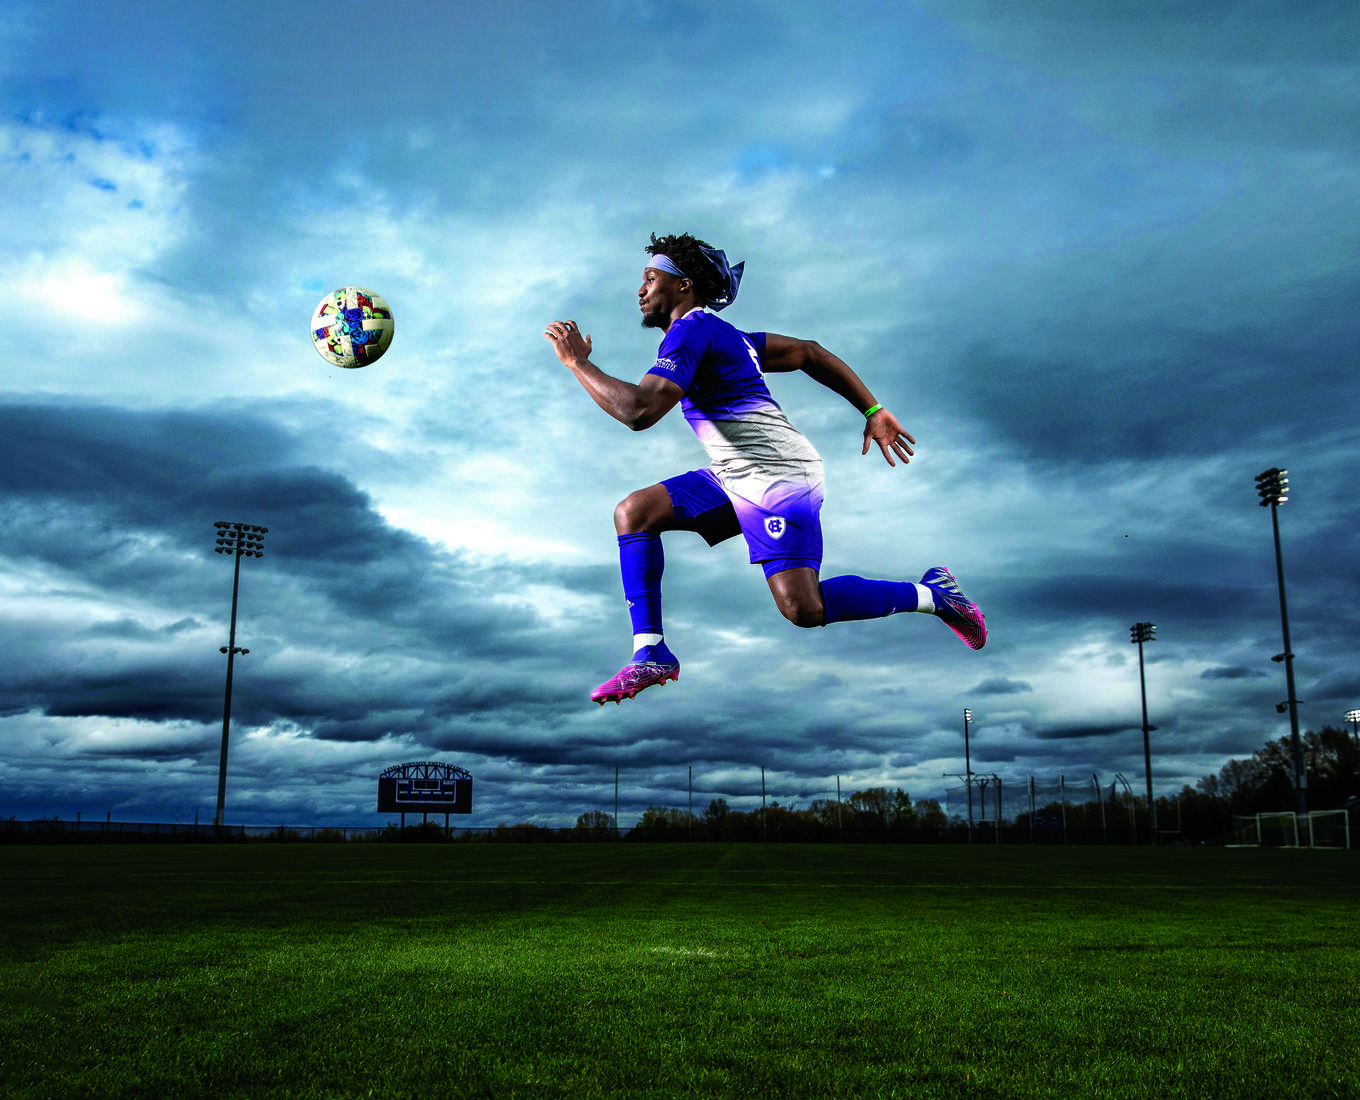 A soccer player in a purple uniform jumping in the air for a soccer ball that is at eye level